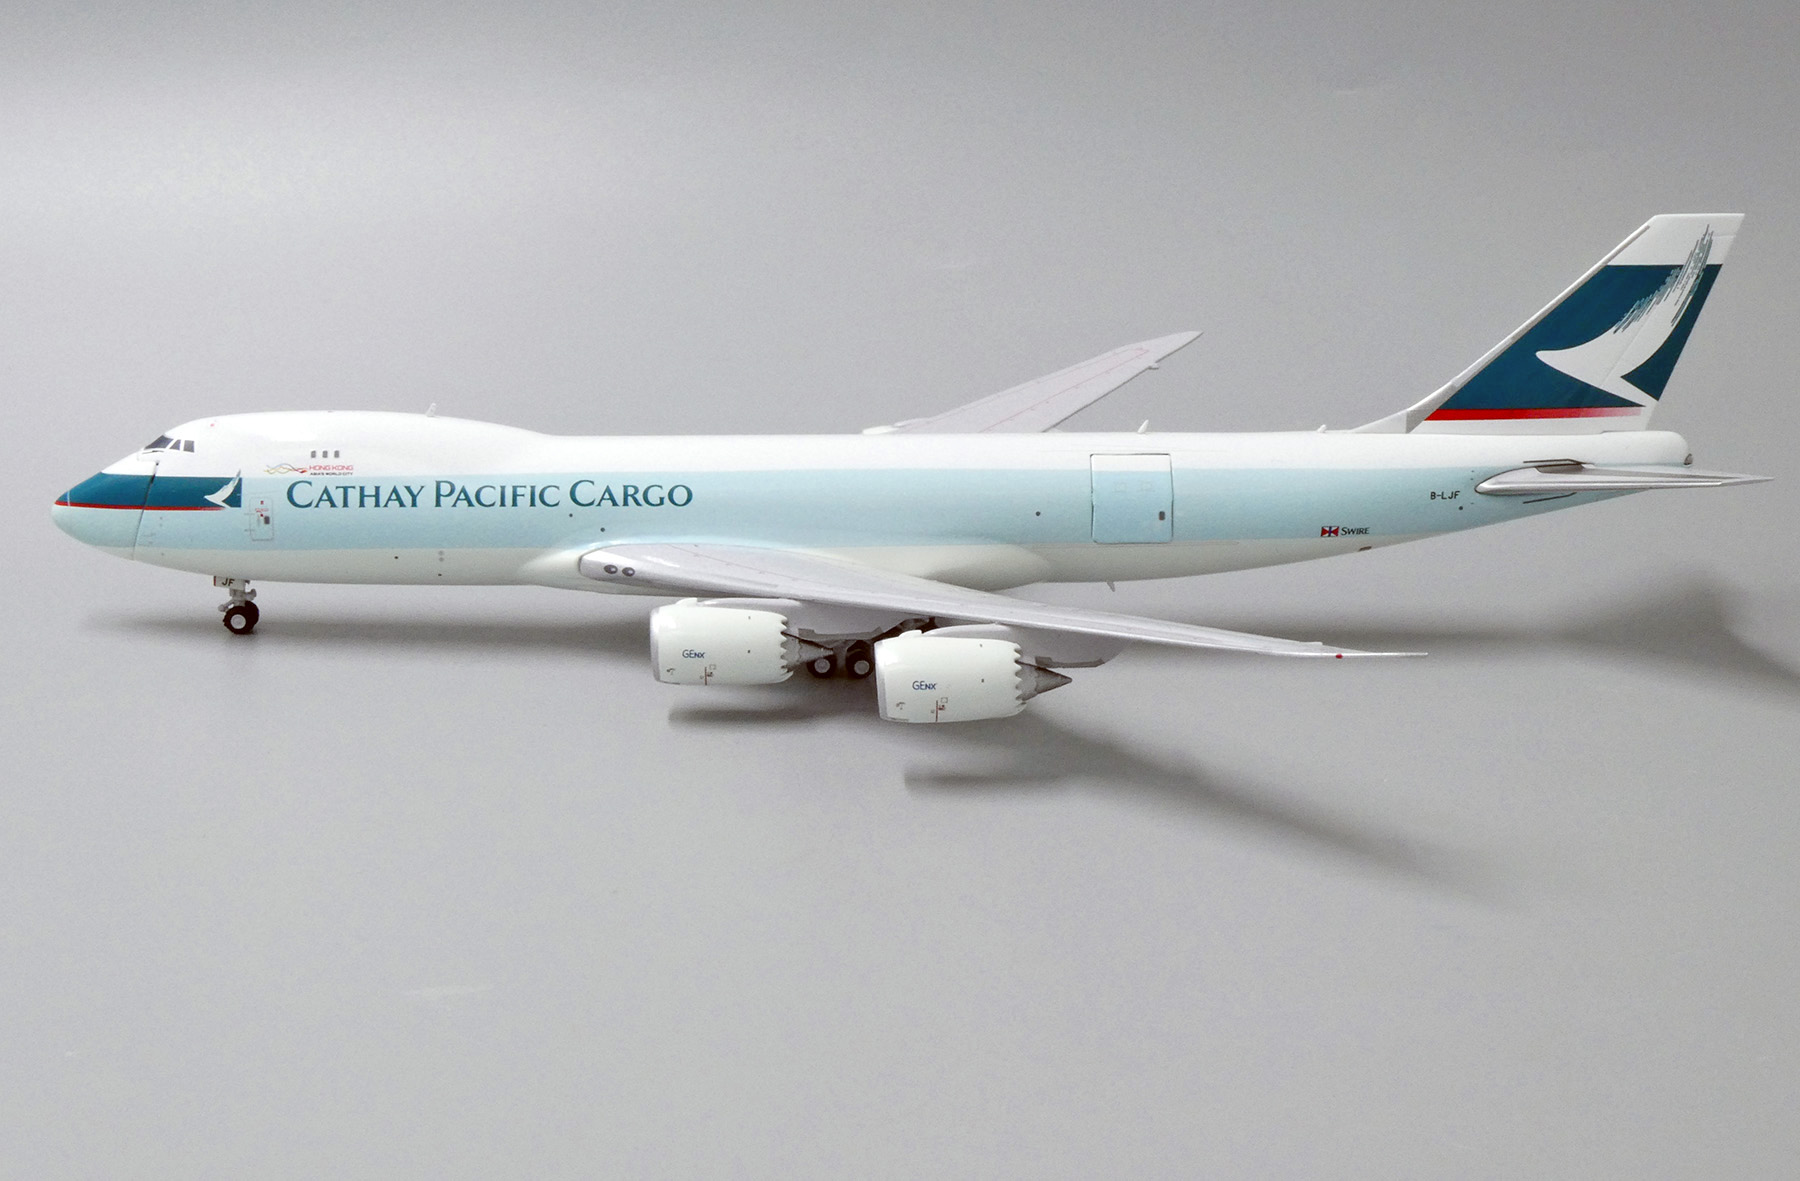 Cathay Pacific Cargo Boeing 747-8F